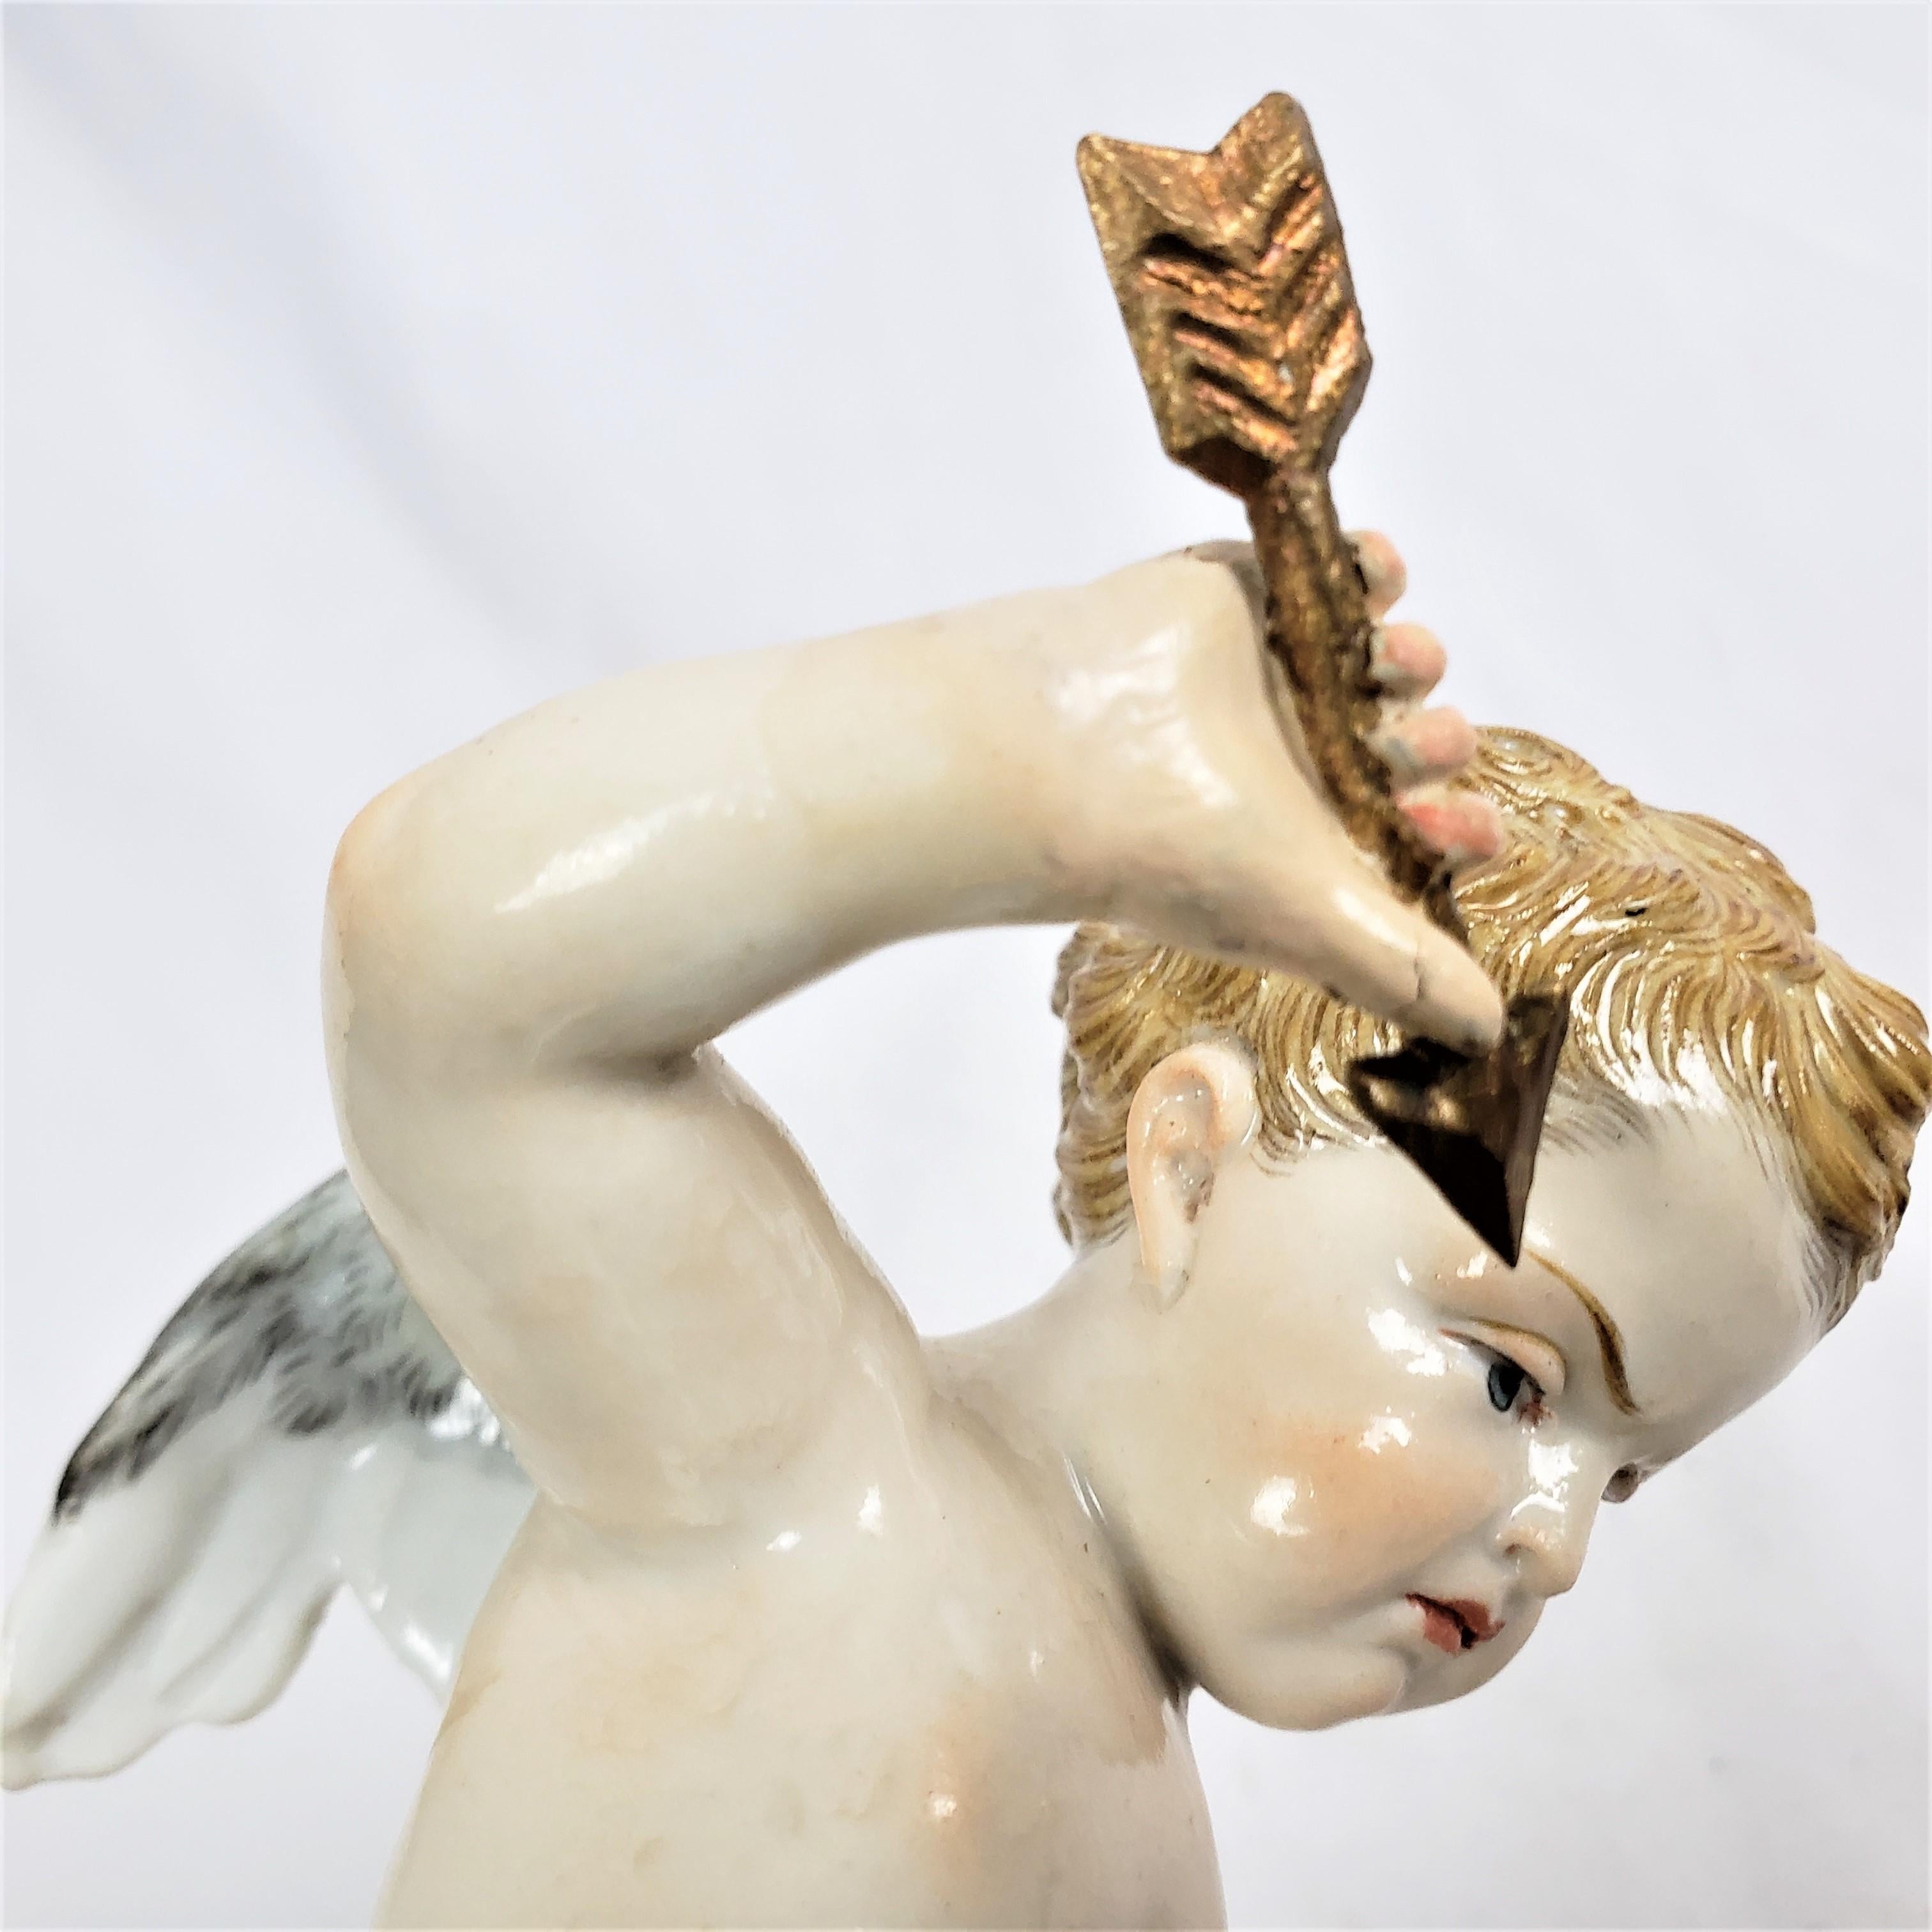 Antique Meissen Porcelain Figurine of Cupid Holding an Arrow & Flaming Heart For Sale 3